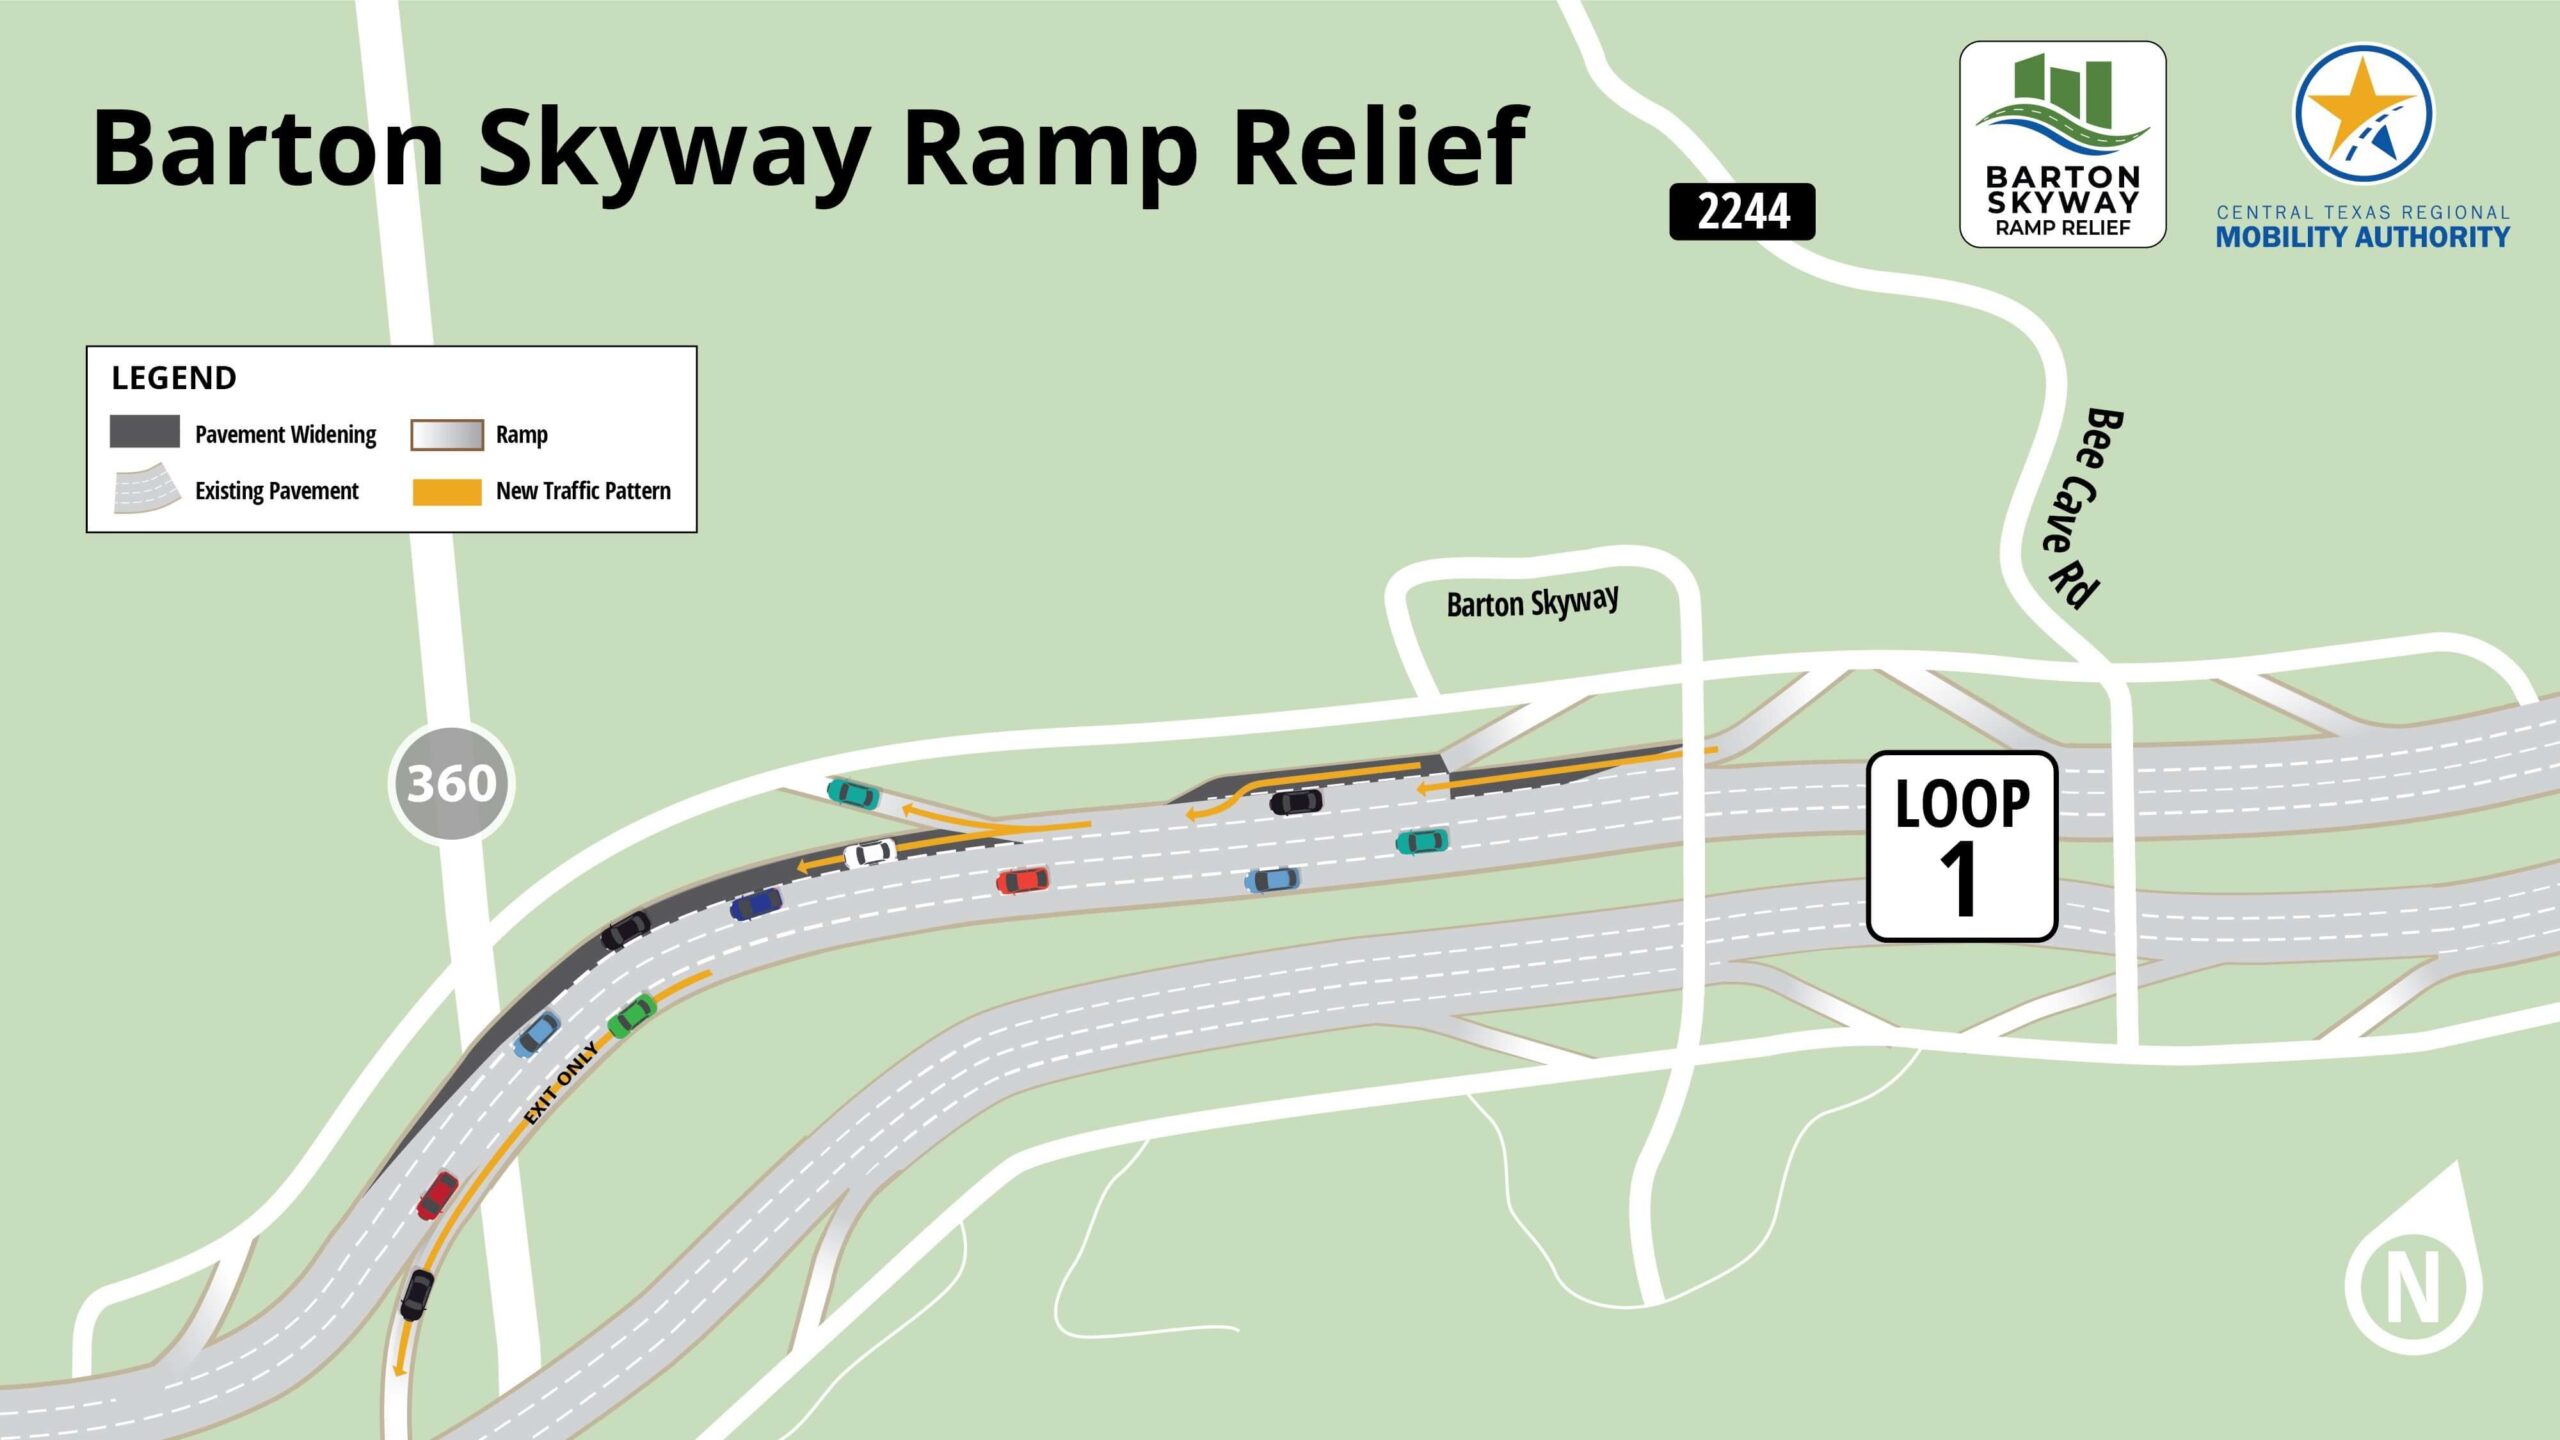 Map showing location and details of the Barton Skyway Ramp Relief